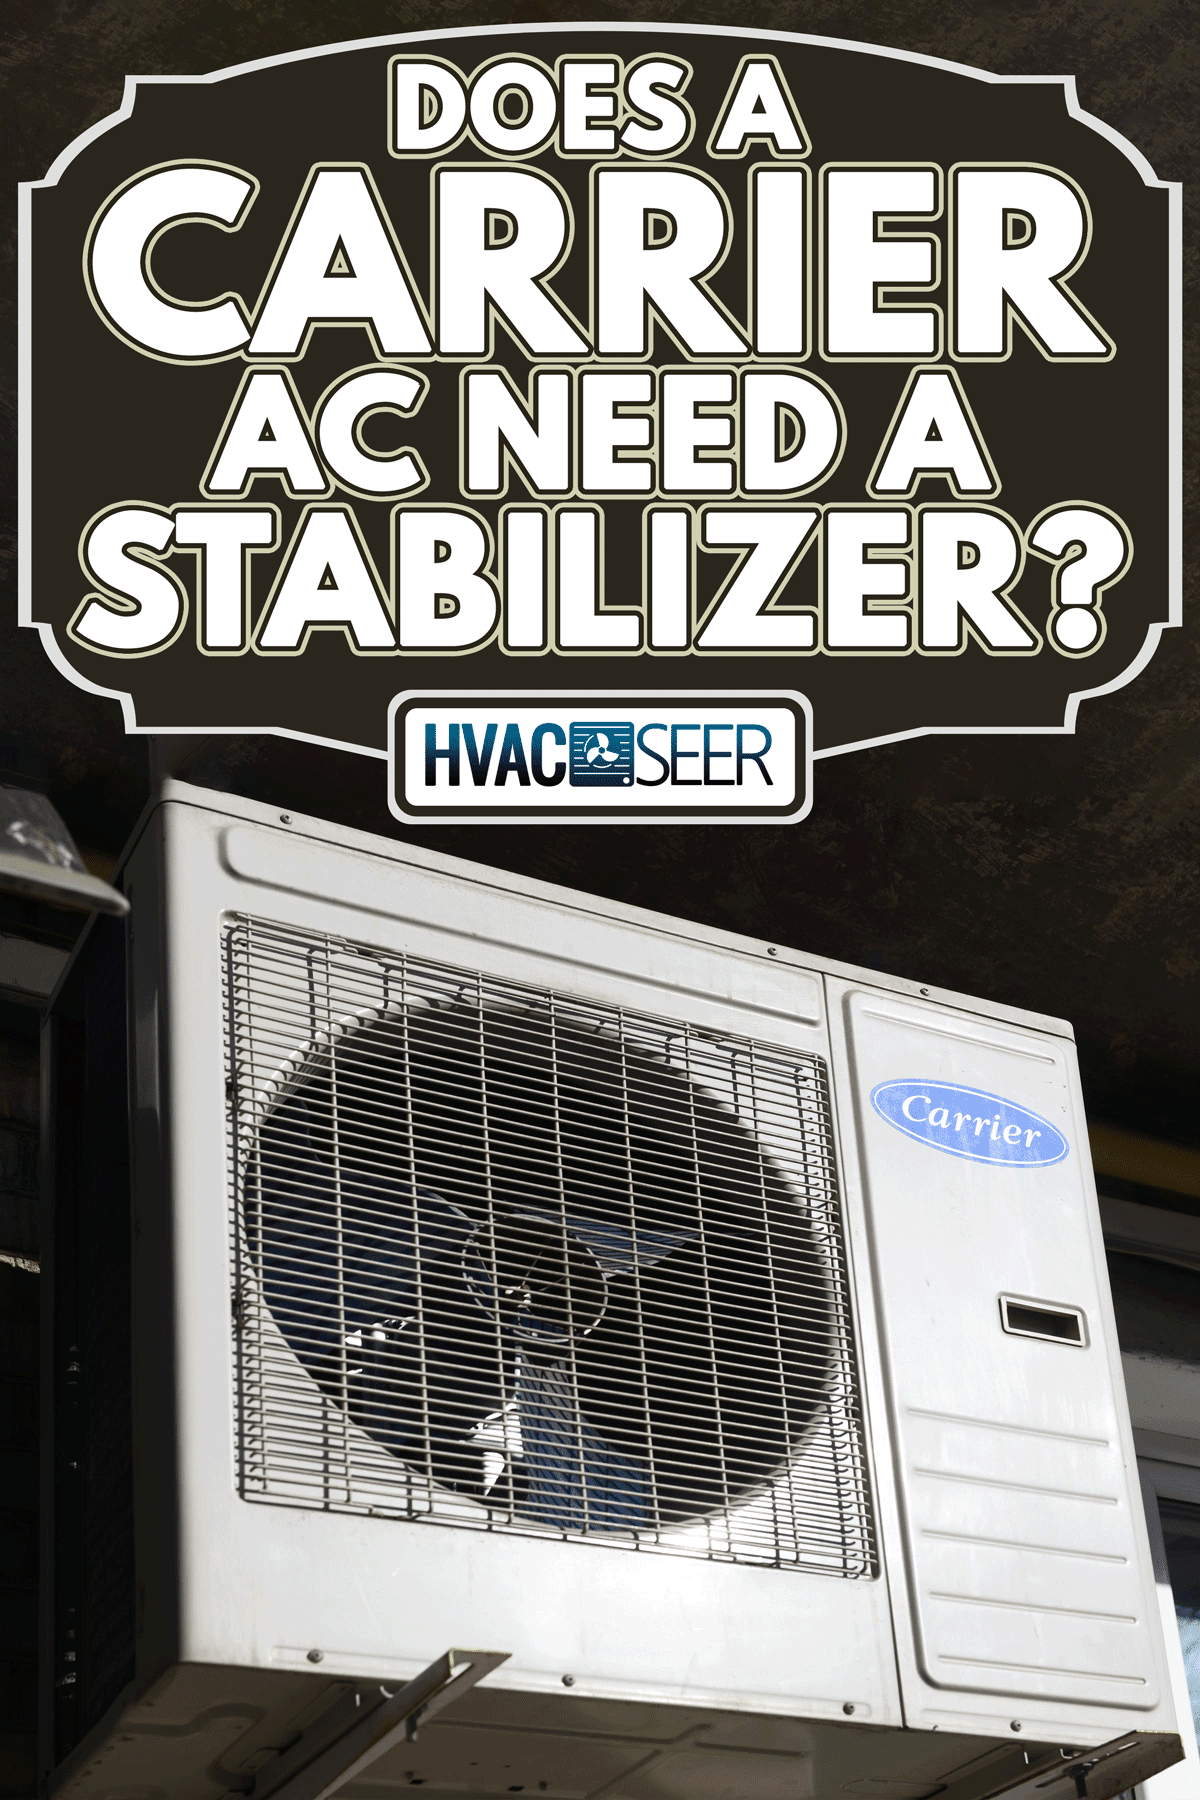 Air conditioning outside the building, Does A Carrier AC Need A Stabilizer?